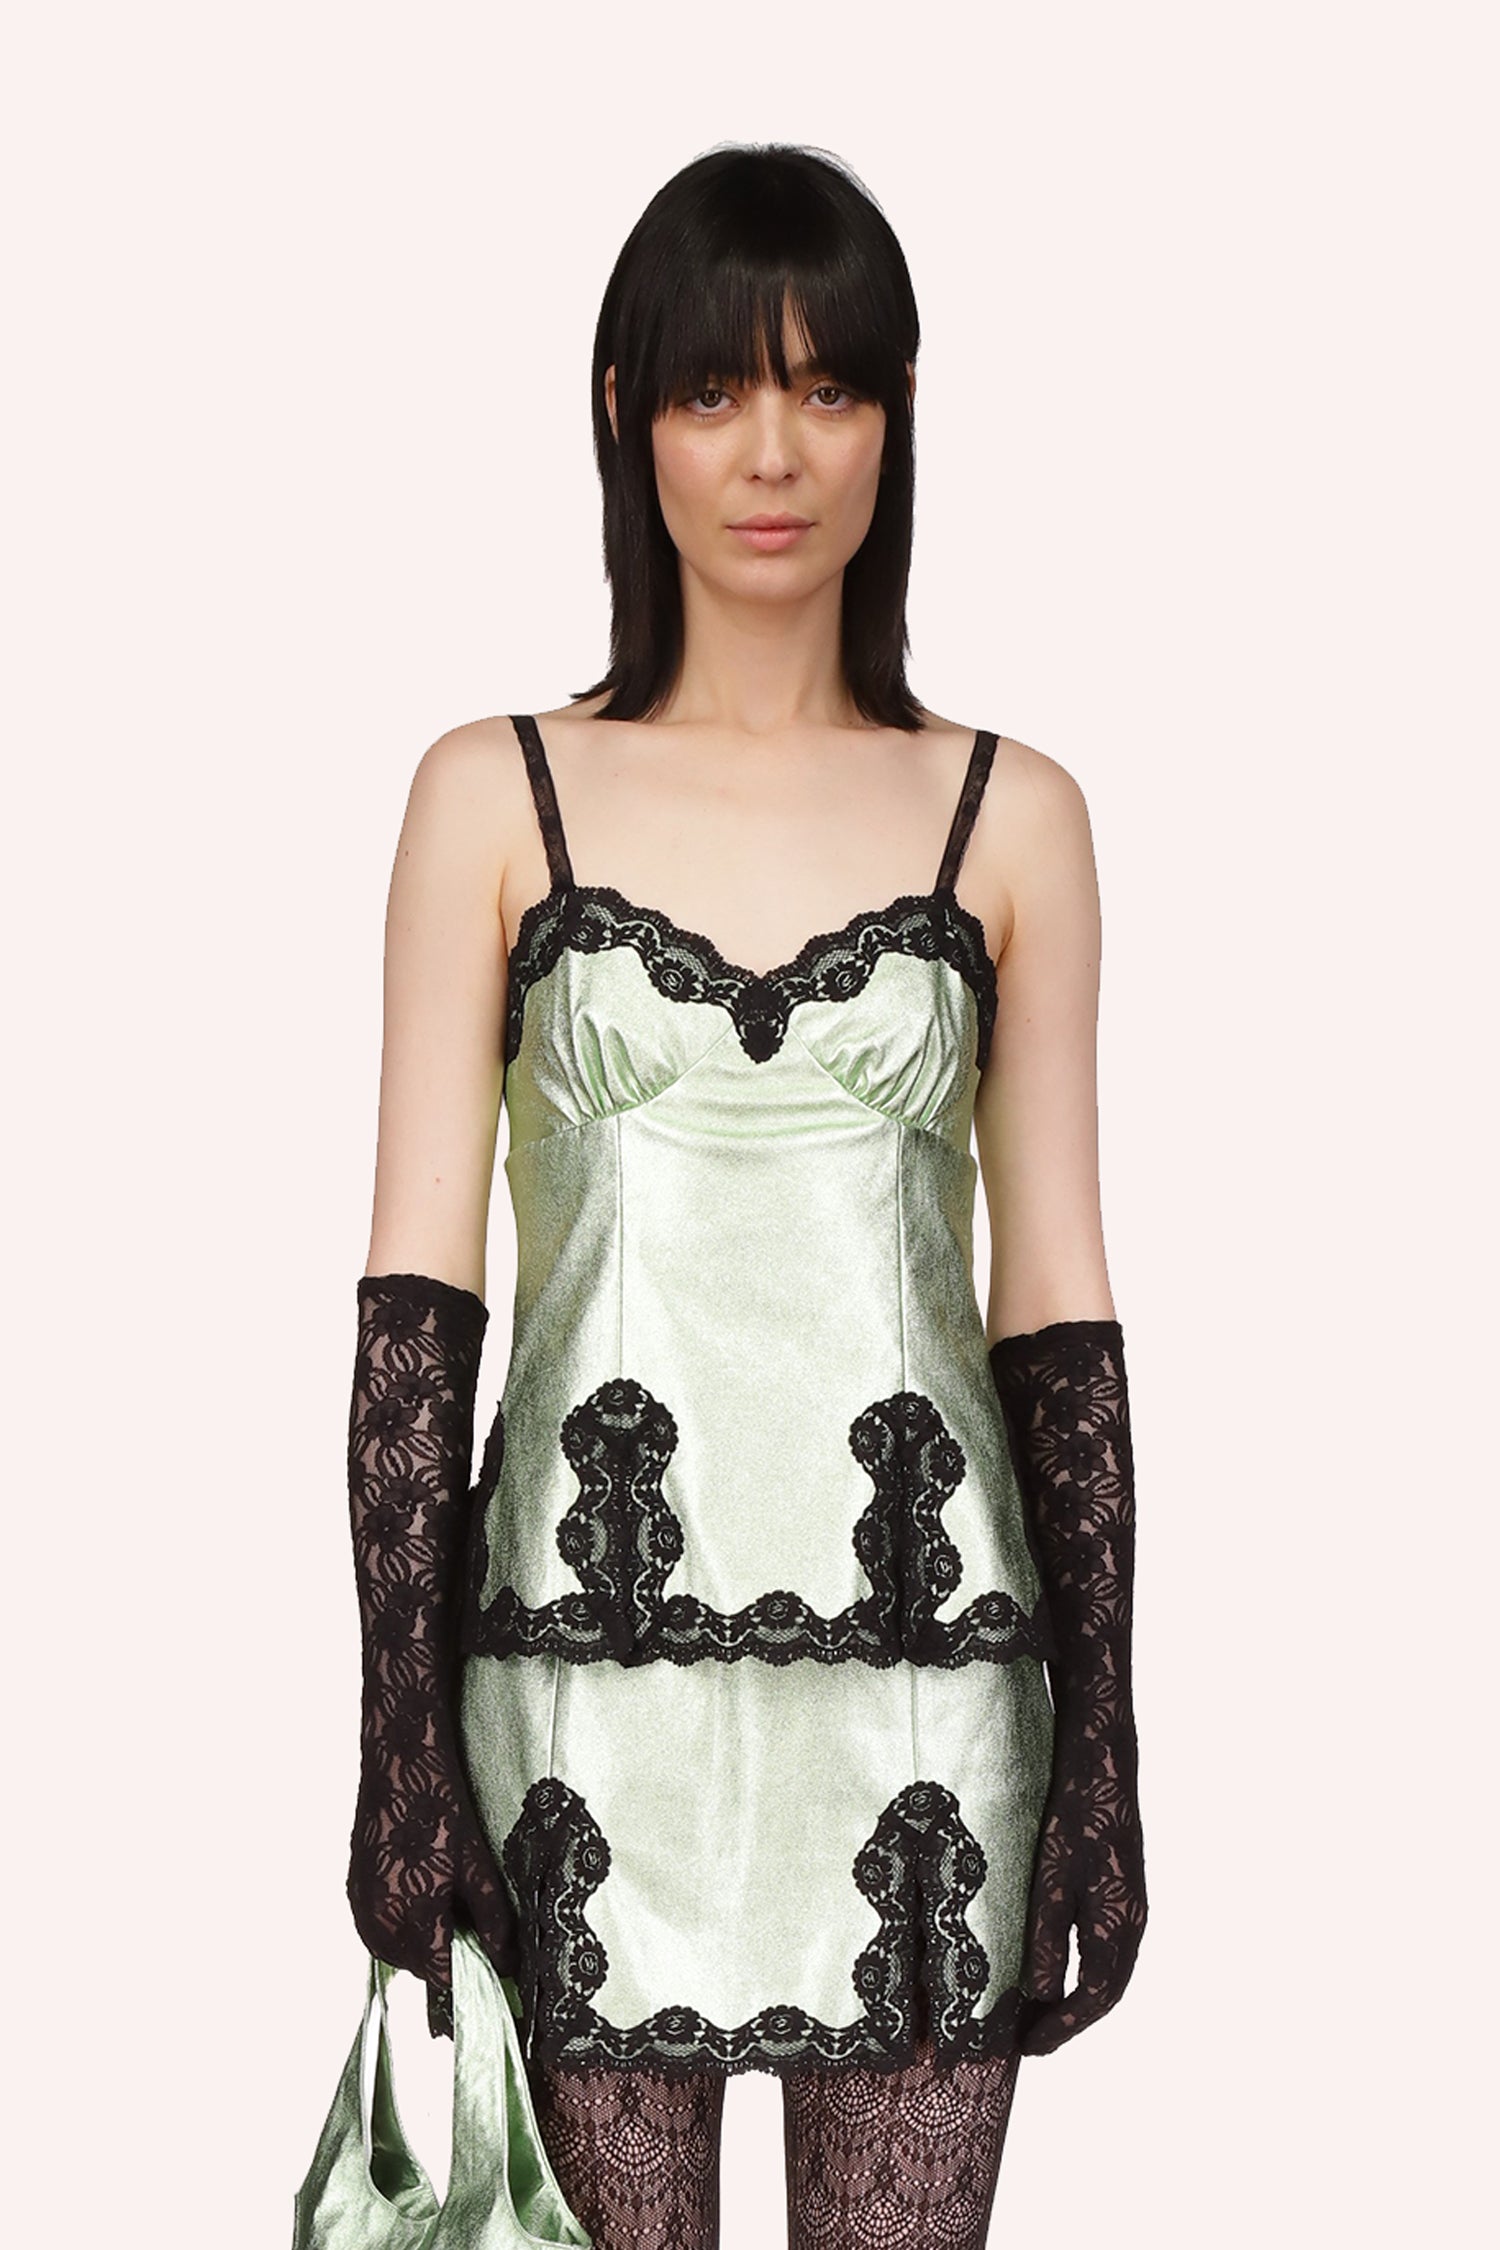  Anna Sui Camisole Top Peppermint, sleeveless, with black straps over the shoulders, black lace around the top and bottom